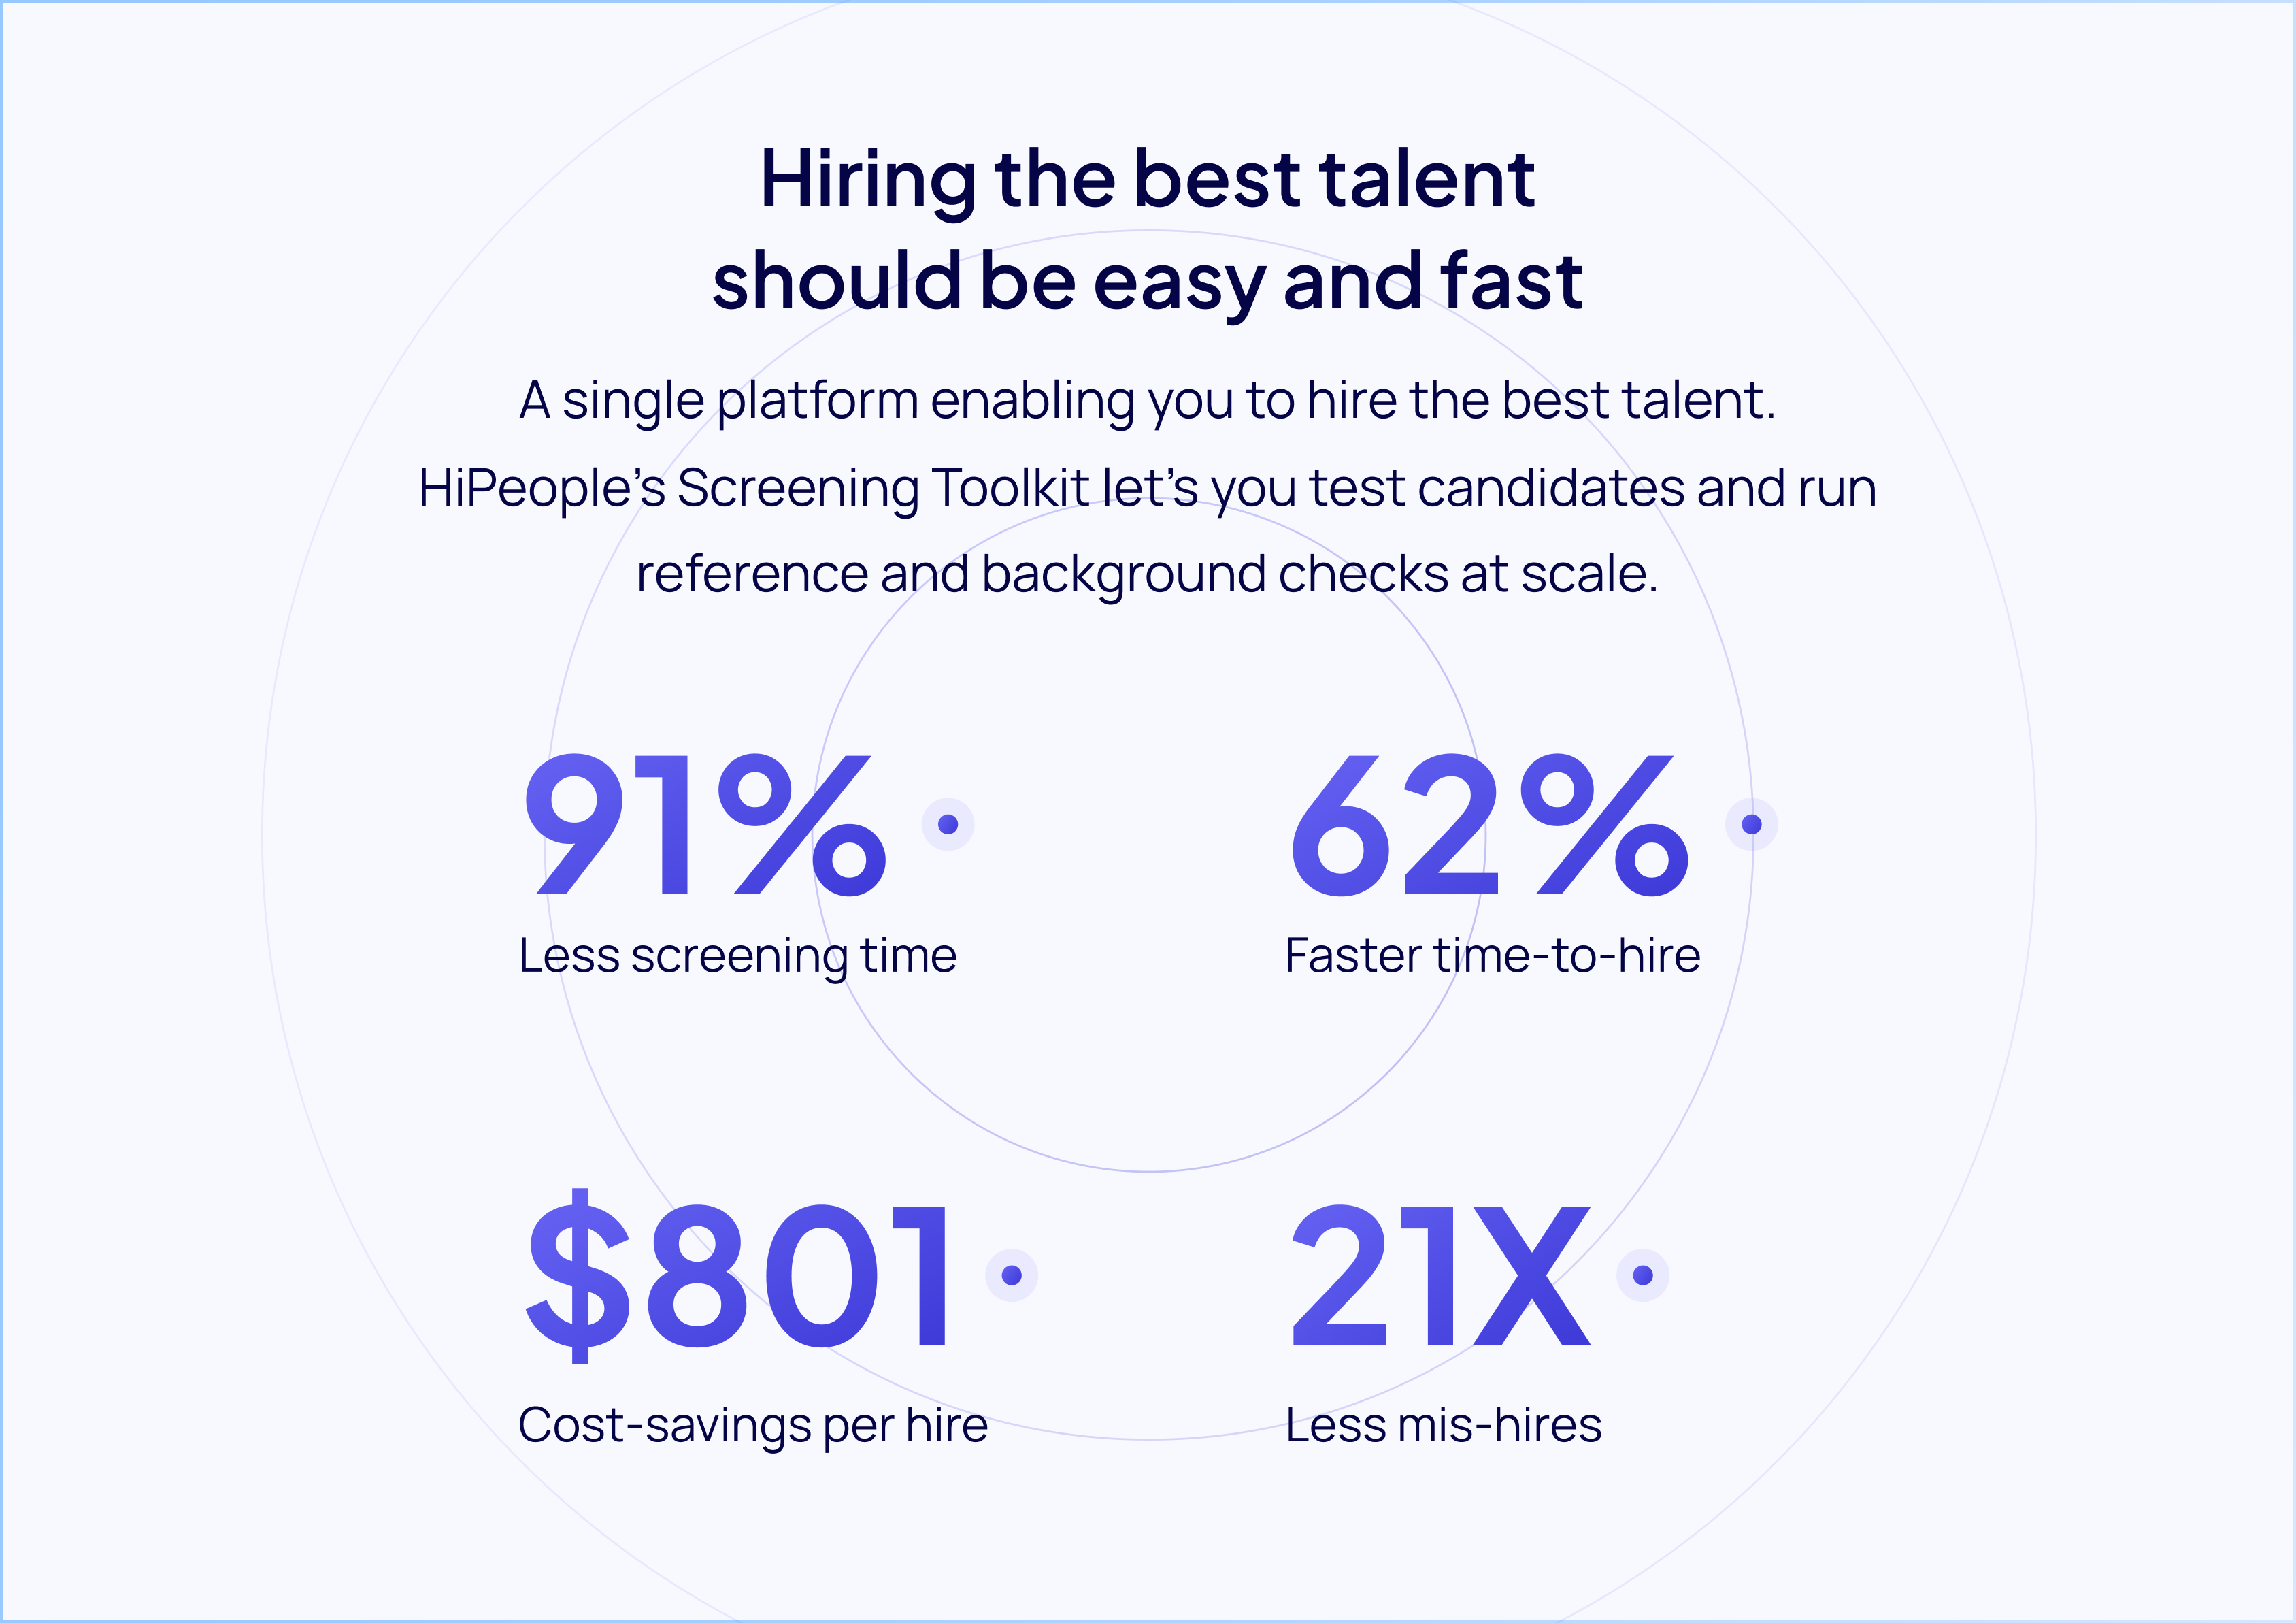 Hiring the best talent should be easy and fast
A single platform enabling you to hire the best talent. HiPeople’s Screening Toolkit let’s you test candidates and run reference and background checks at scale.